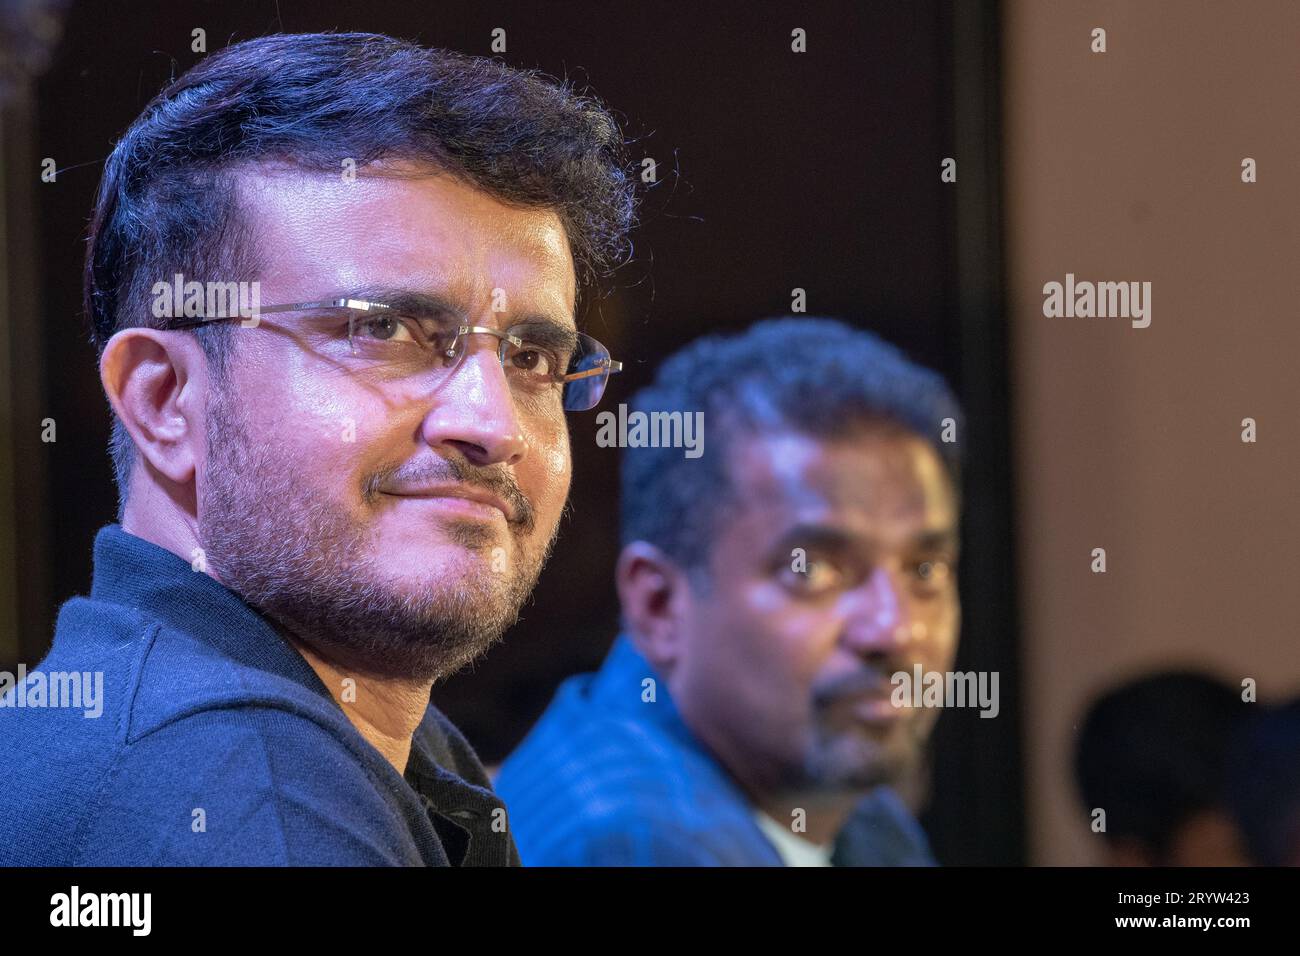 Legendary Sri Lankan cricketer Muthiah Muralidaran and Former Indian Cricket Captain and BCCI President Sourav Ganguly seen during the promotion of film 800, a biopic based on the life and career of cricketer Muthiah Muralidaran. (Photo by Dipayan Bose / SOPA Images/Sipa USA) Stock Photo